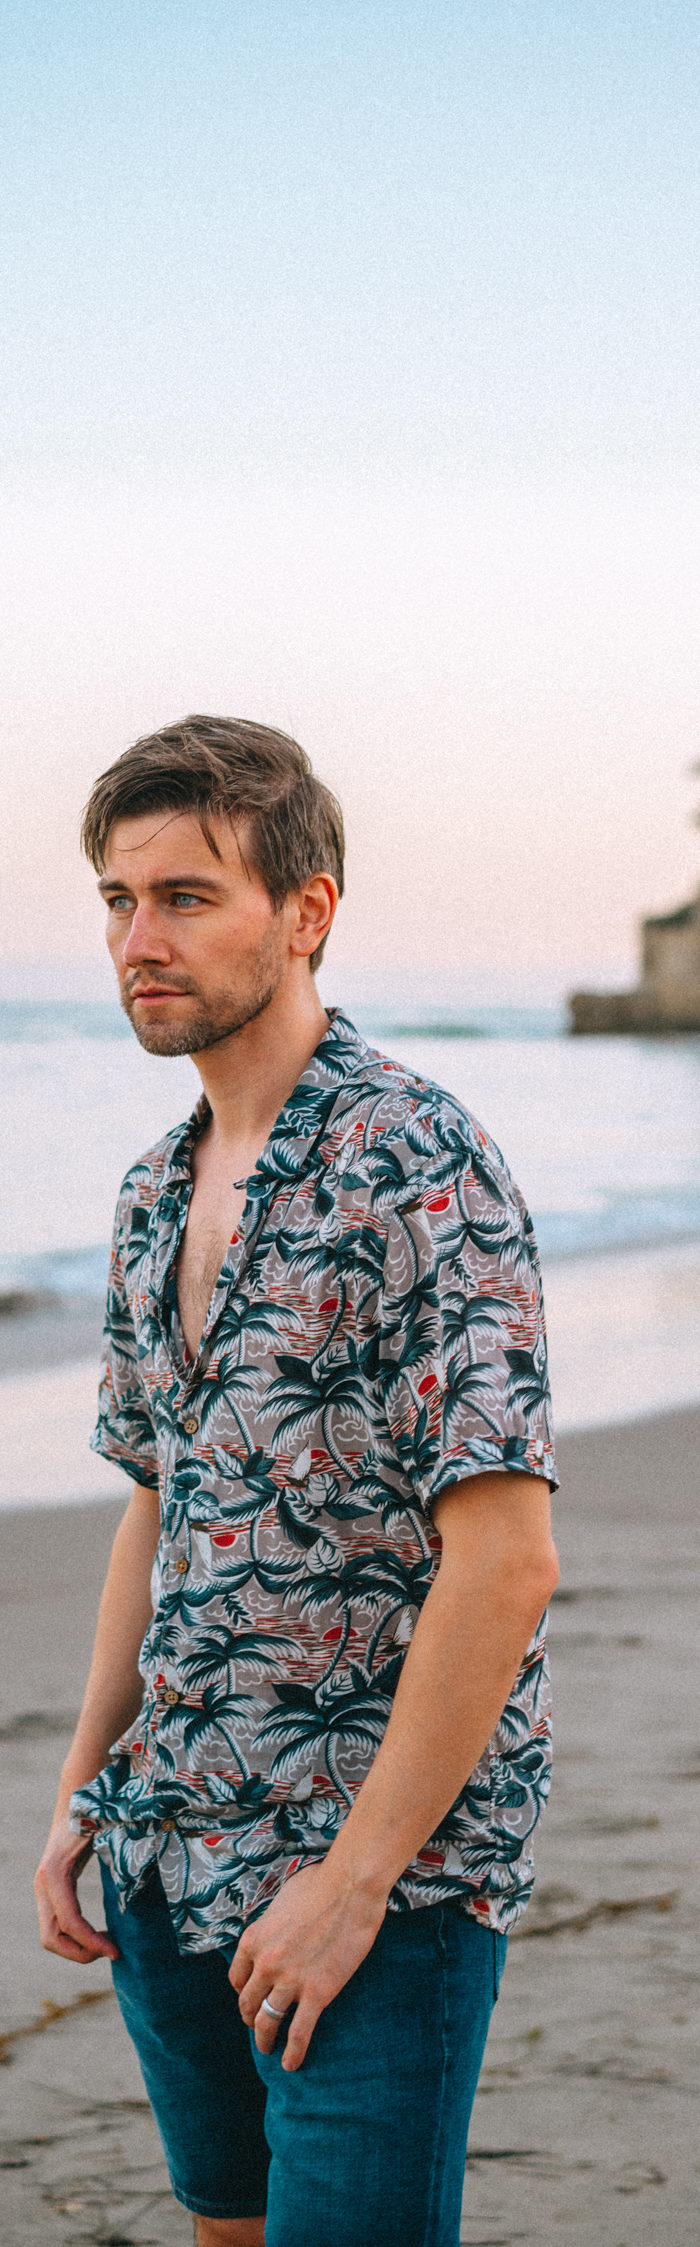 Alyssa Campanella of The A List blog visits Hotel Californian in Santa Barbara with Torrance Coombs for an anniversary trip.